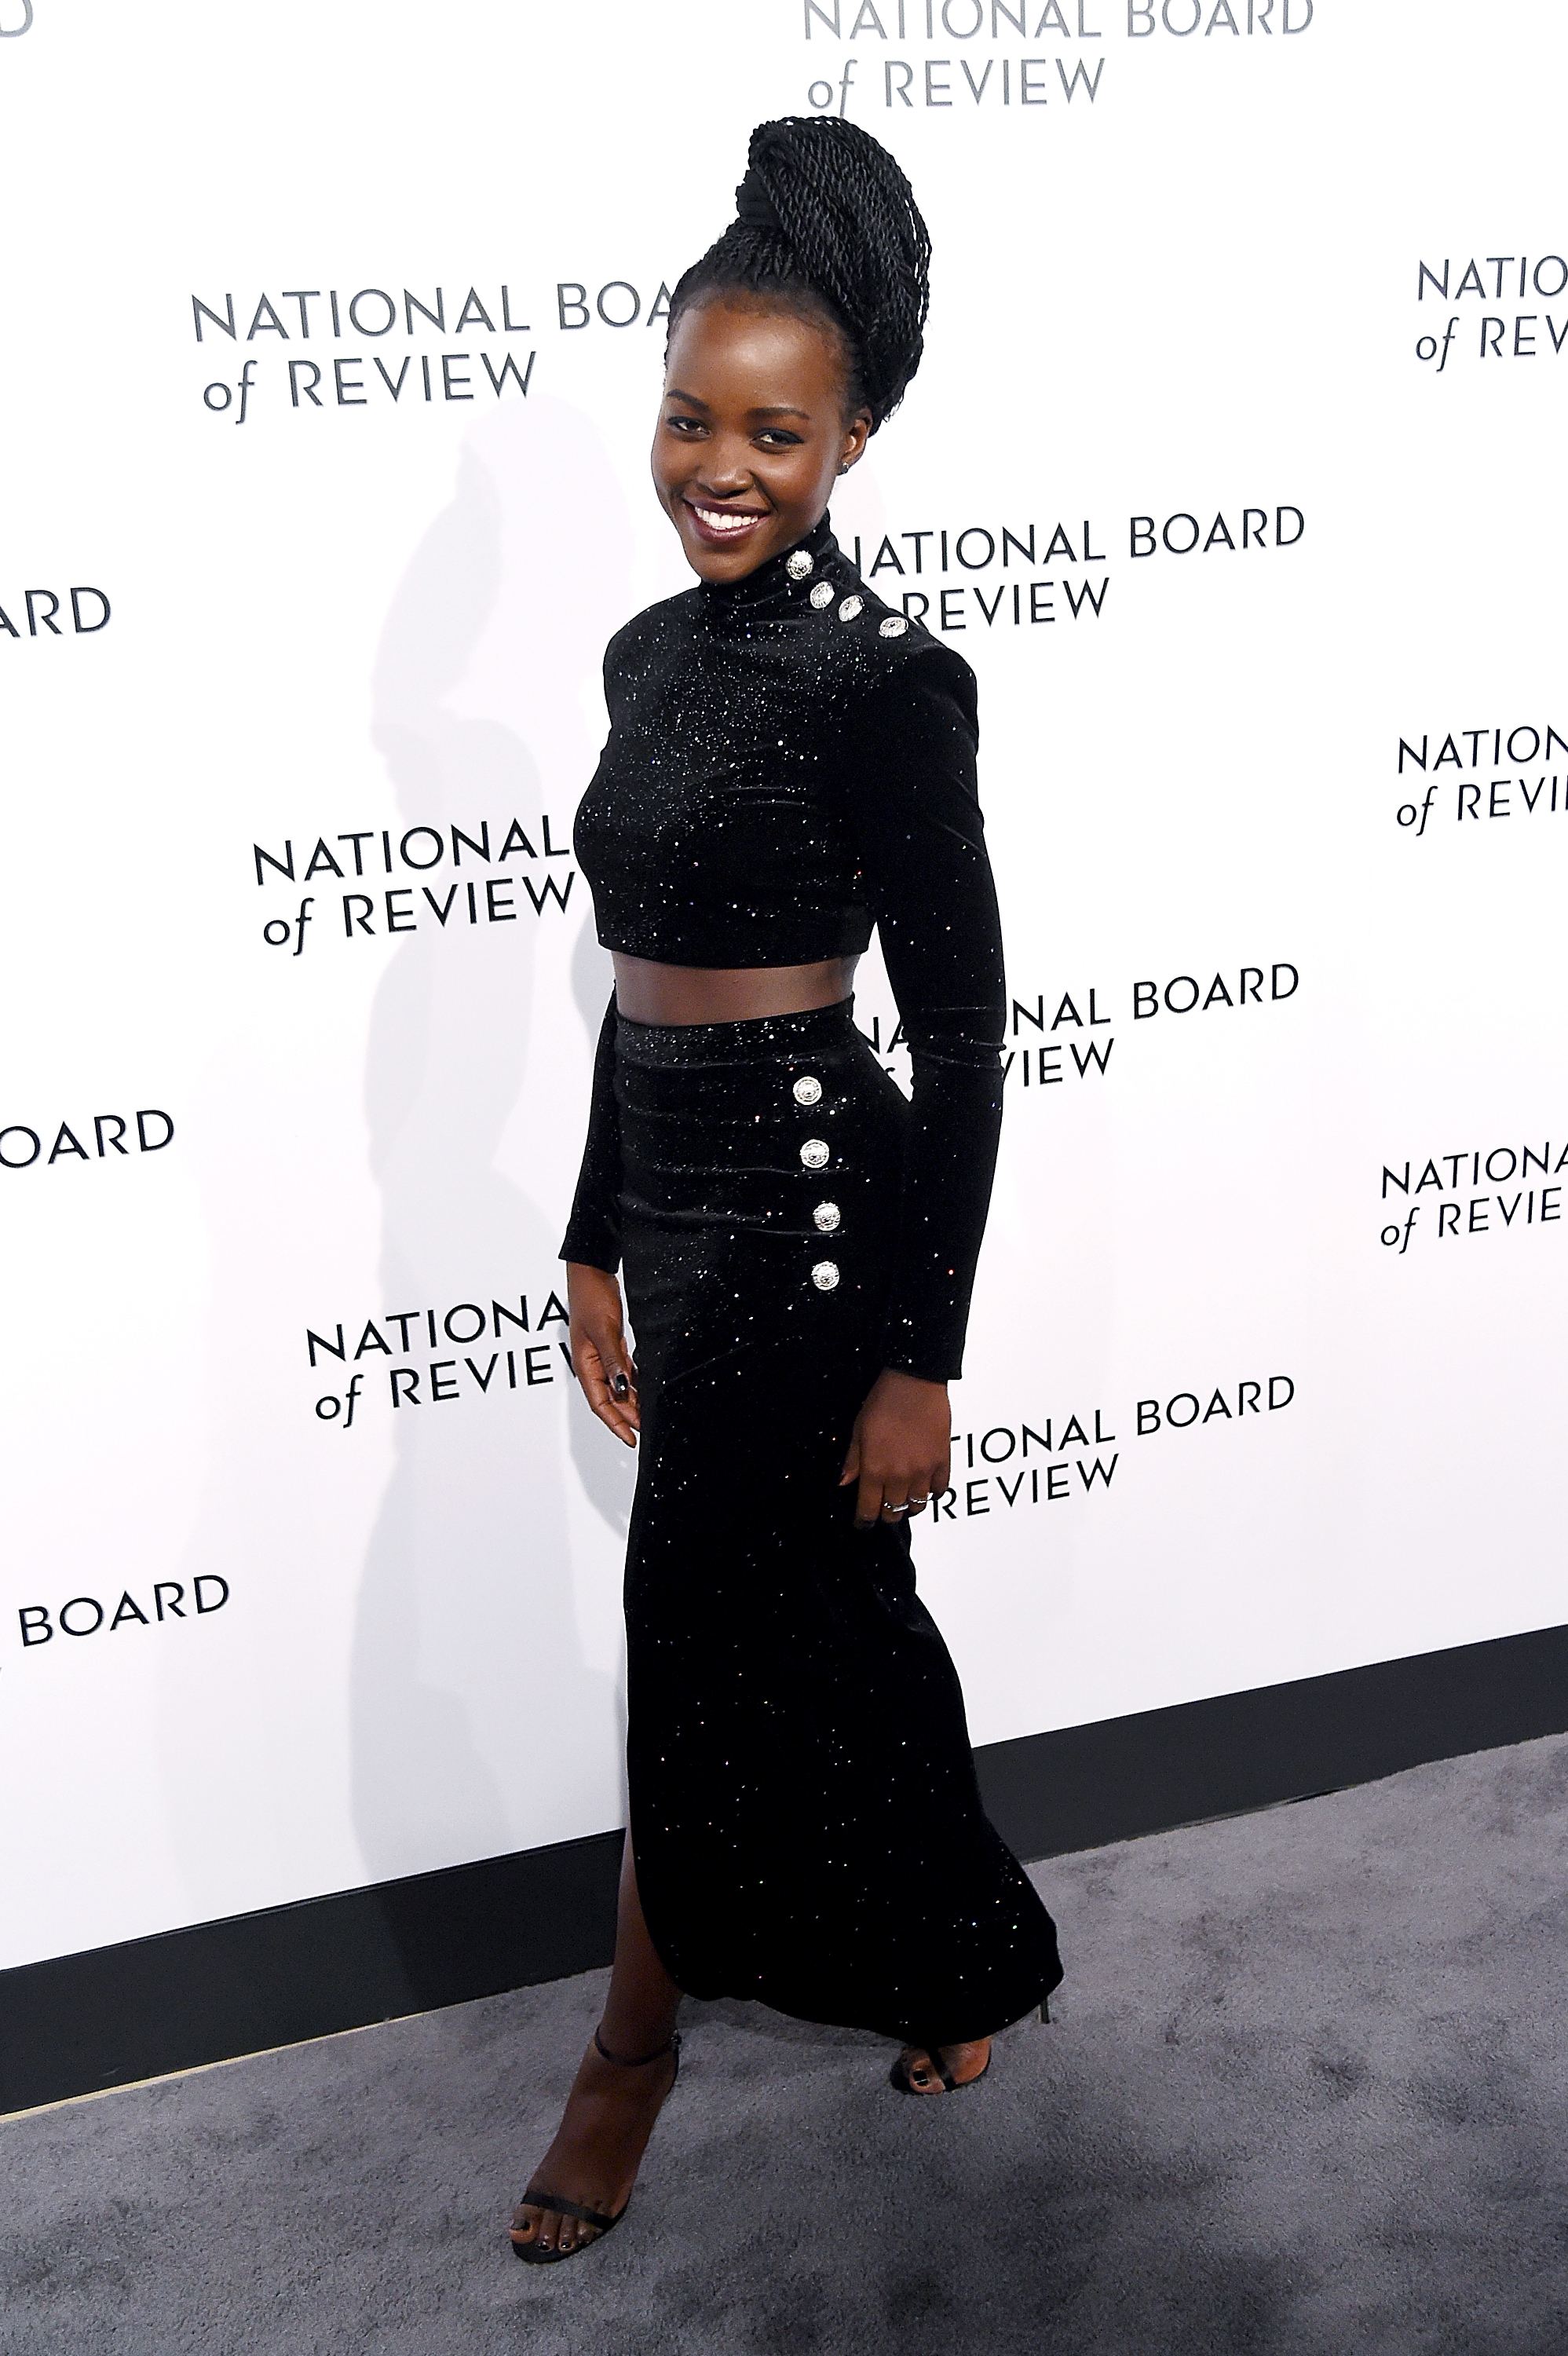 2018 National Board Of Review Awards Gala